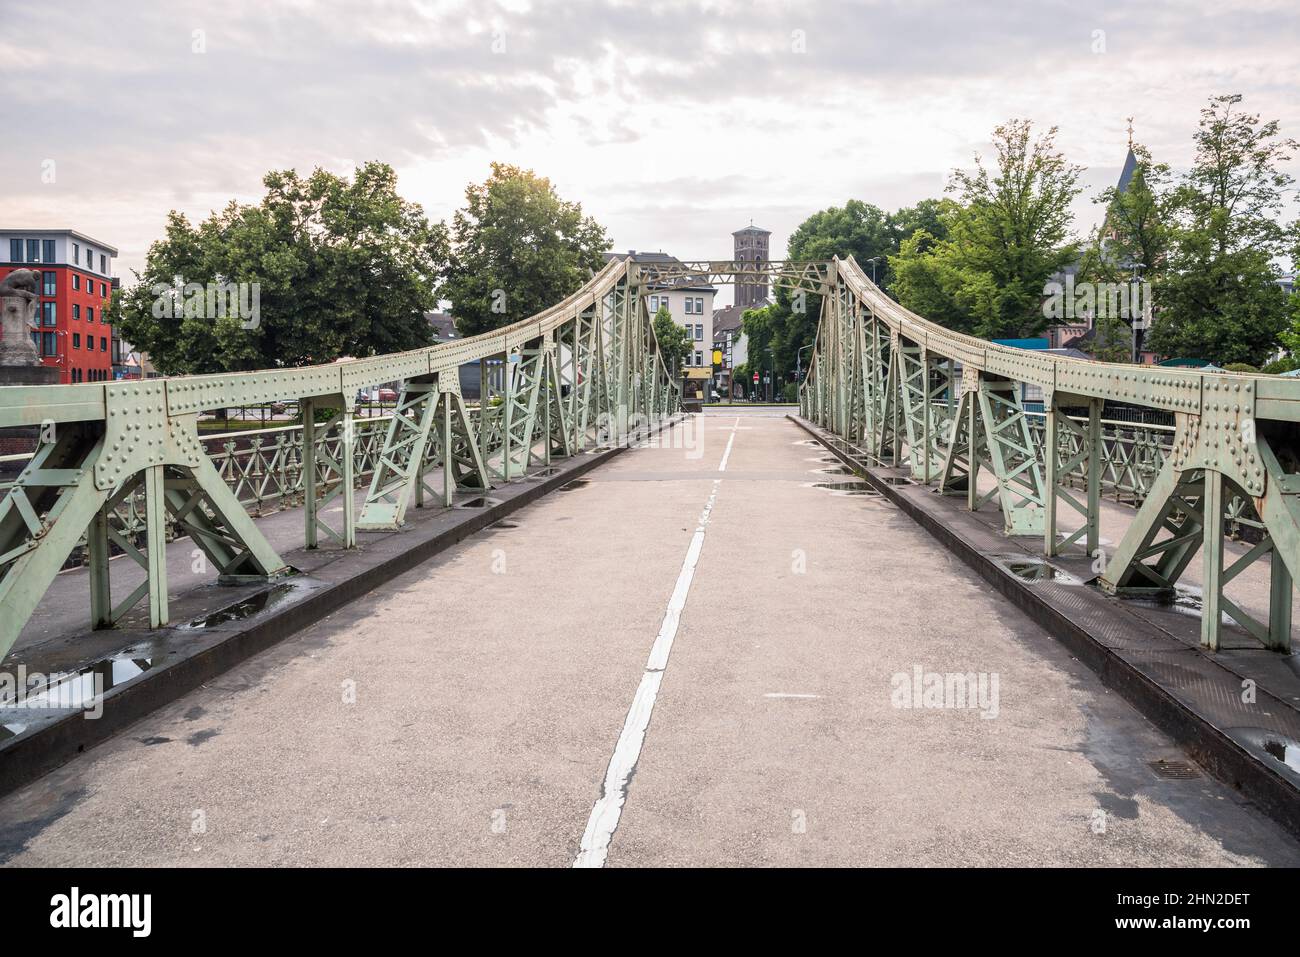 Narrow steel road bridge leading to a residentail district from an old harbour area on a cloudy summer day Stock Photo